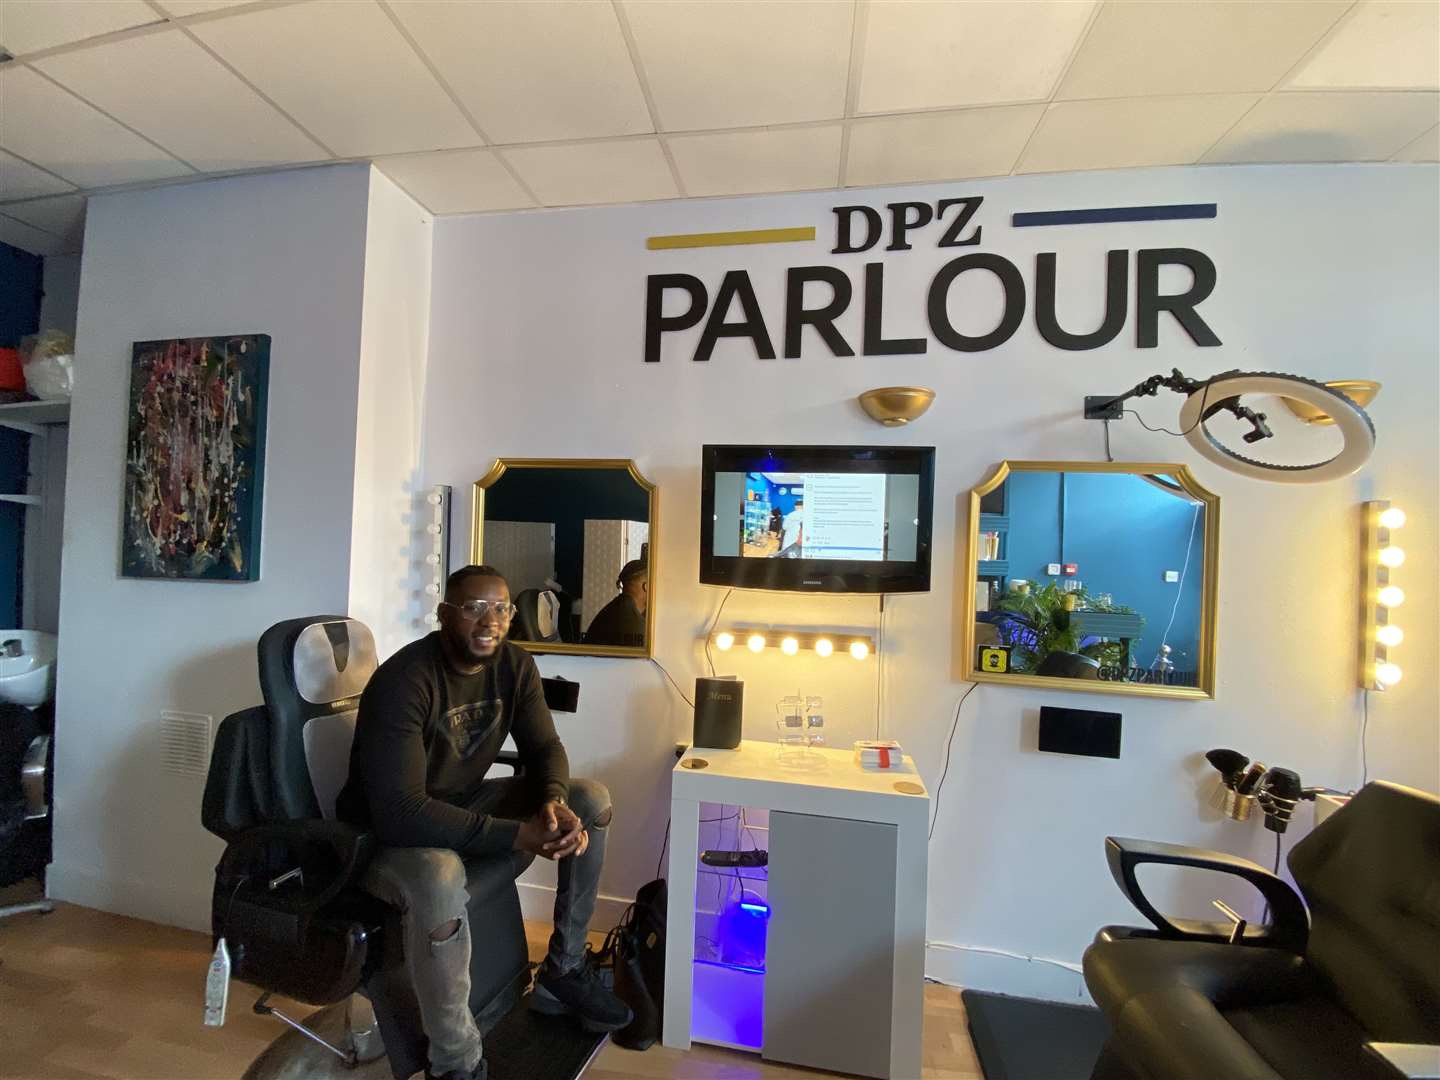 The Dartford musician opened the shop six months ago